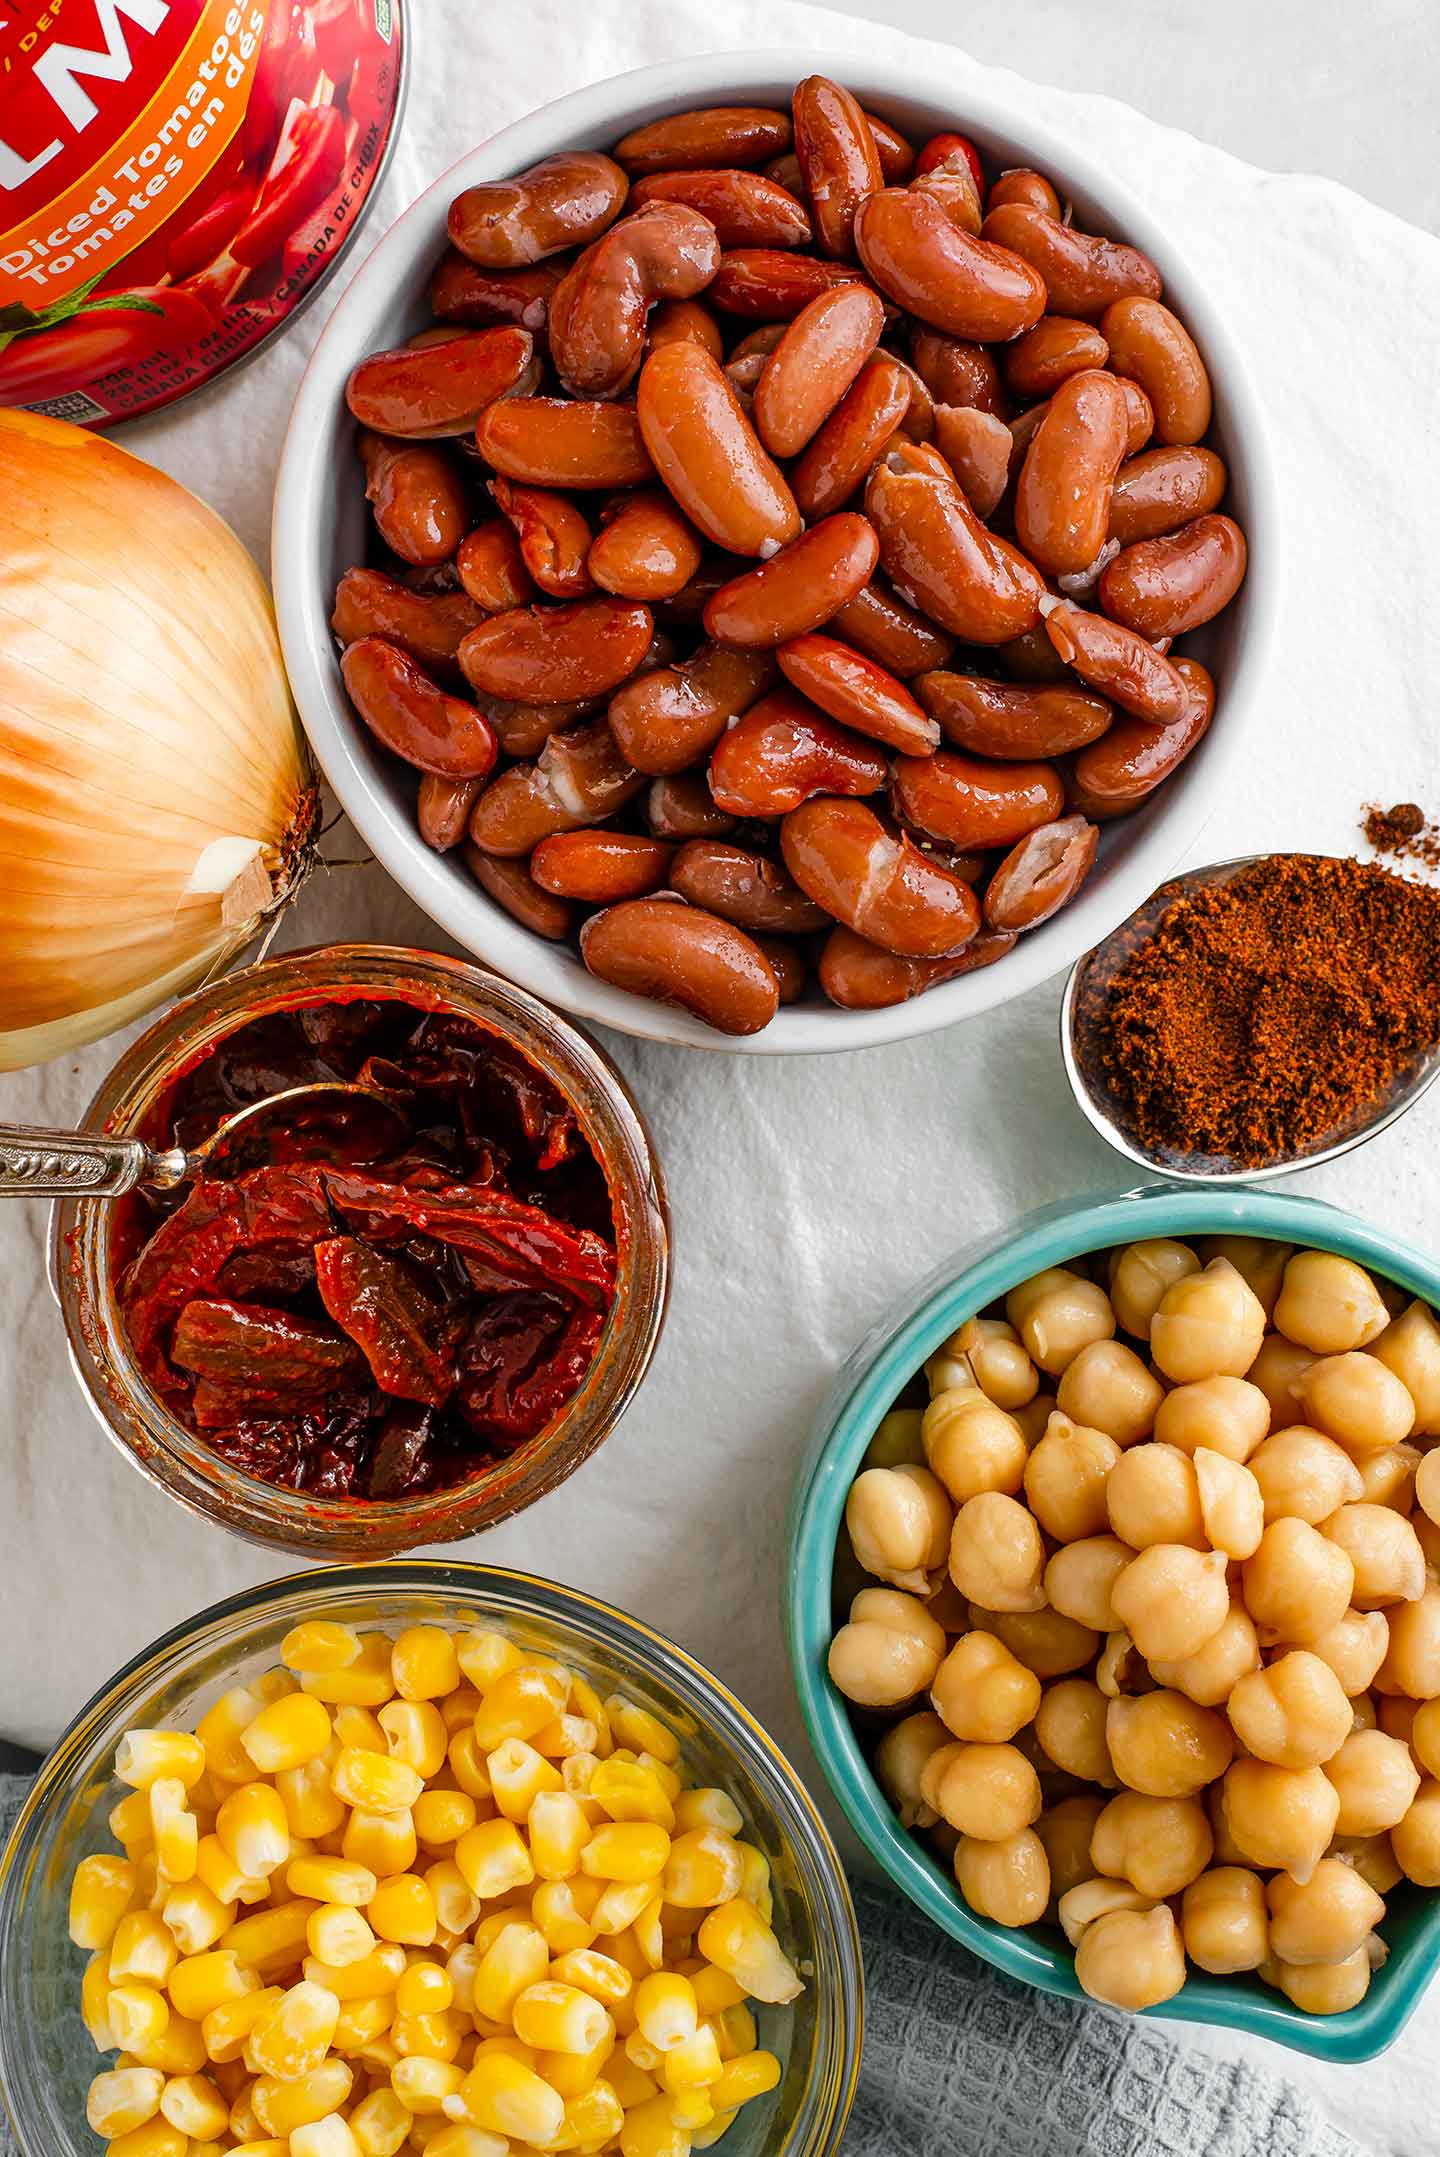 Top down view of an assortment of beans and seasonings on a white tray.